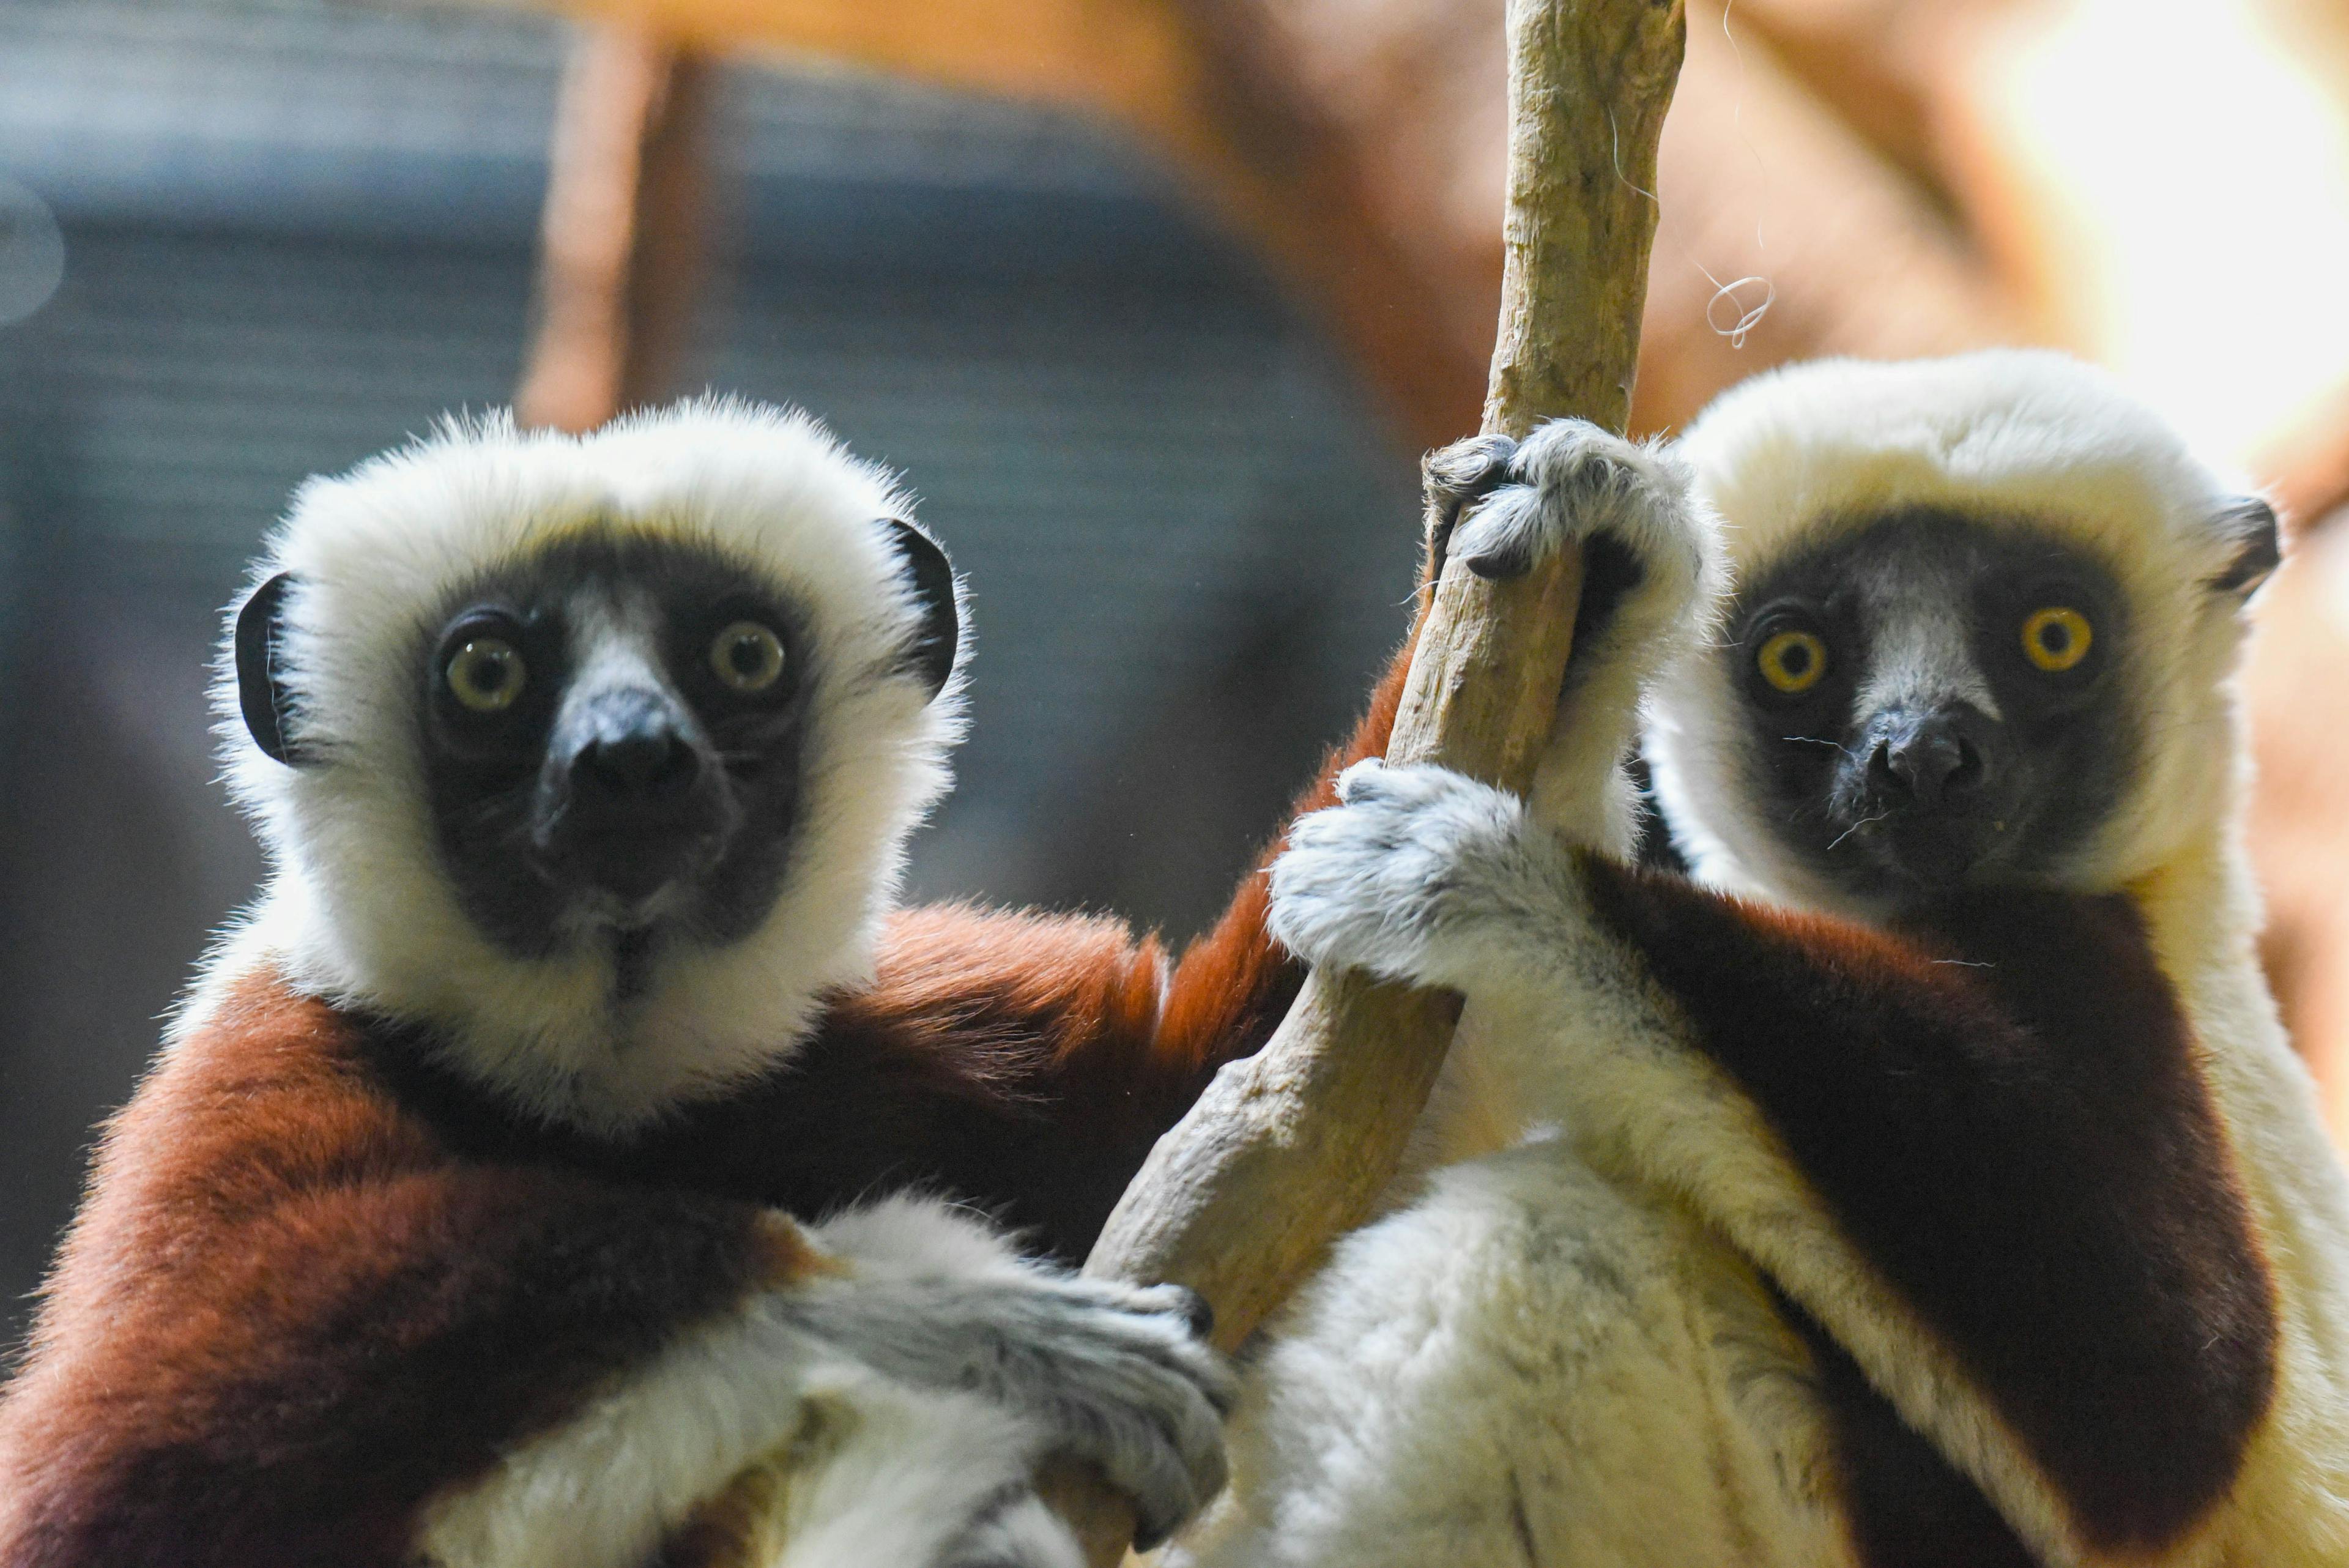 Two coquerel’s sifaka arrive at Maryland Zoo 